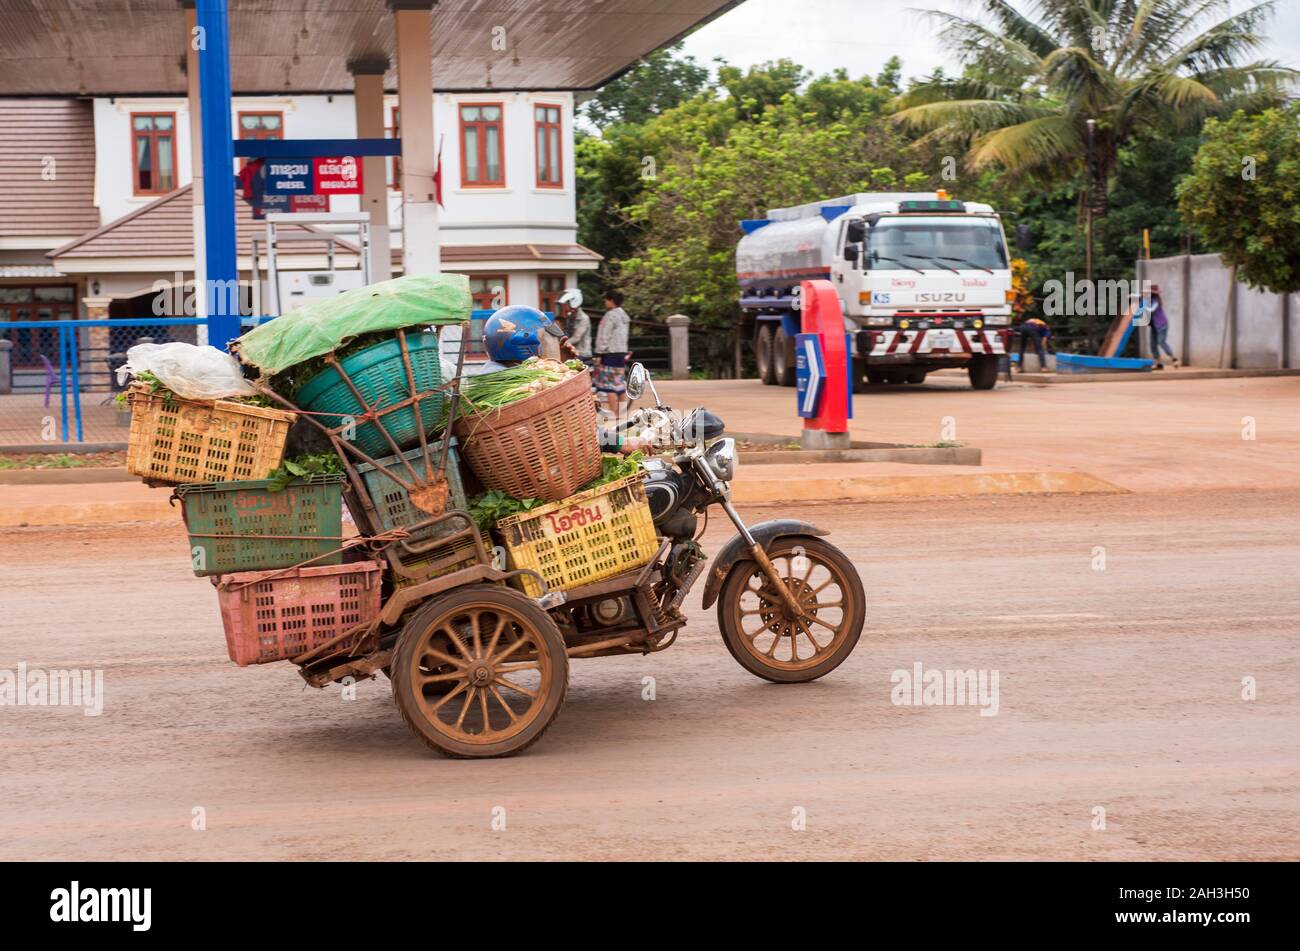 Laongam, Laos overloaded motorcycle Stock Photo